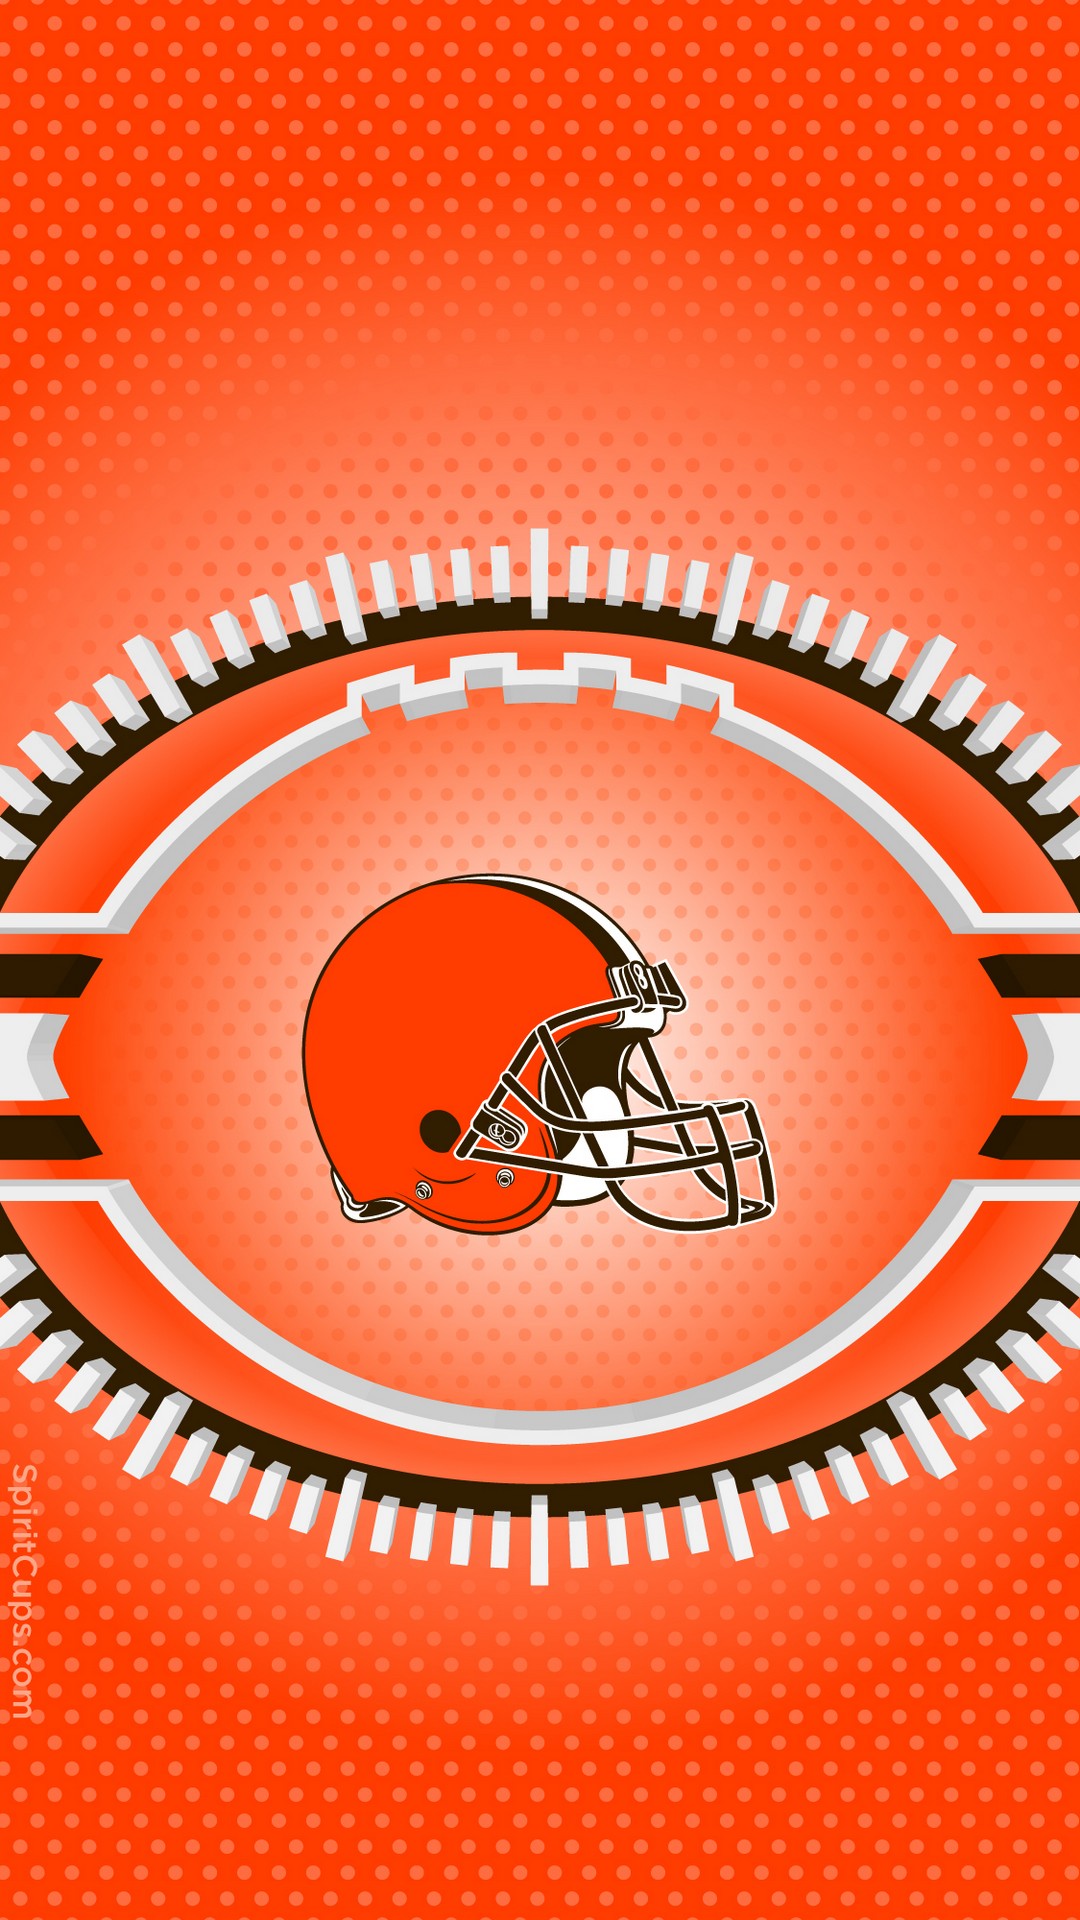 Cleveland Browns iPhone XR Wallpaper With high-resolution 1080X1920 pixel. Download and set as wallpaper for Apple iPhone X, XS Max, XR, 8, 7, 6, SE, iPad, Android